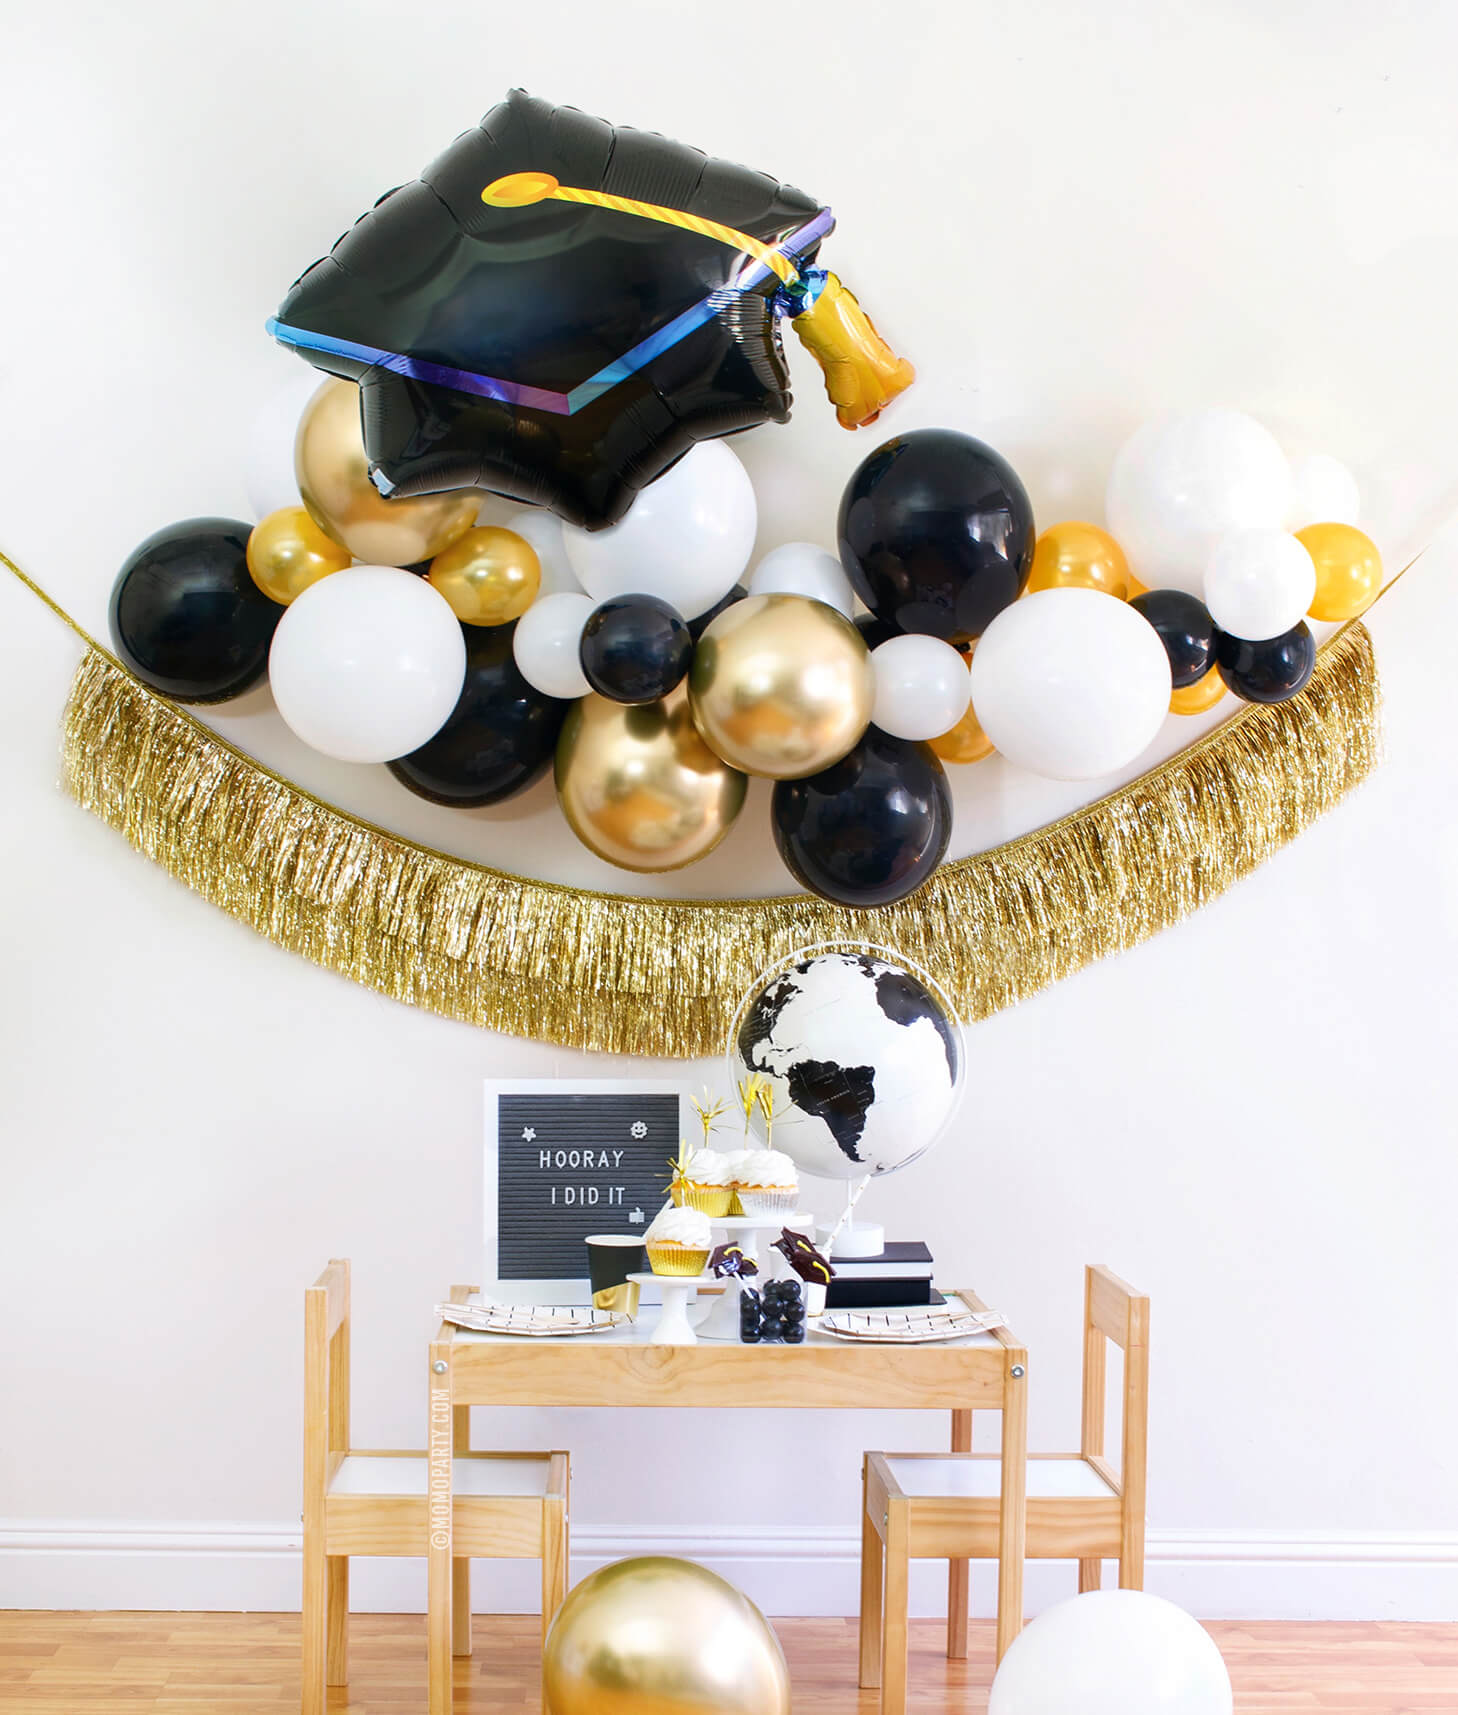 Momo party modern graduation party at home box, come with black, gold and white Latex balloon garland, Black Graduation Cap Foil Balloon, Gold Tinsel Fringe Garland as backdrop decoration. Black and Gold stripe paper plates, stripe napkins, Assorted Gold Dipped Cups, b&w globe, letter board with "hooray i did it" sign, cupcakes, black gum balls on a kid table for a graduation celebration